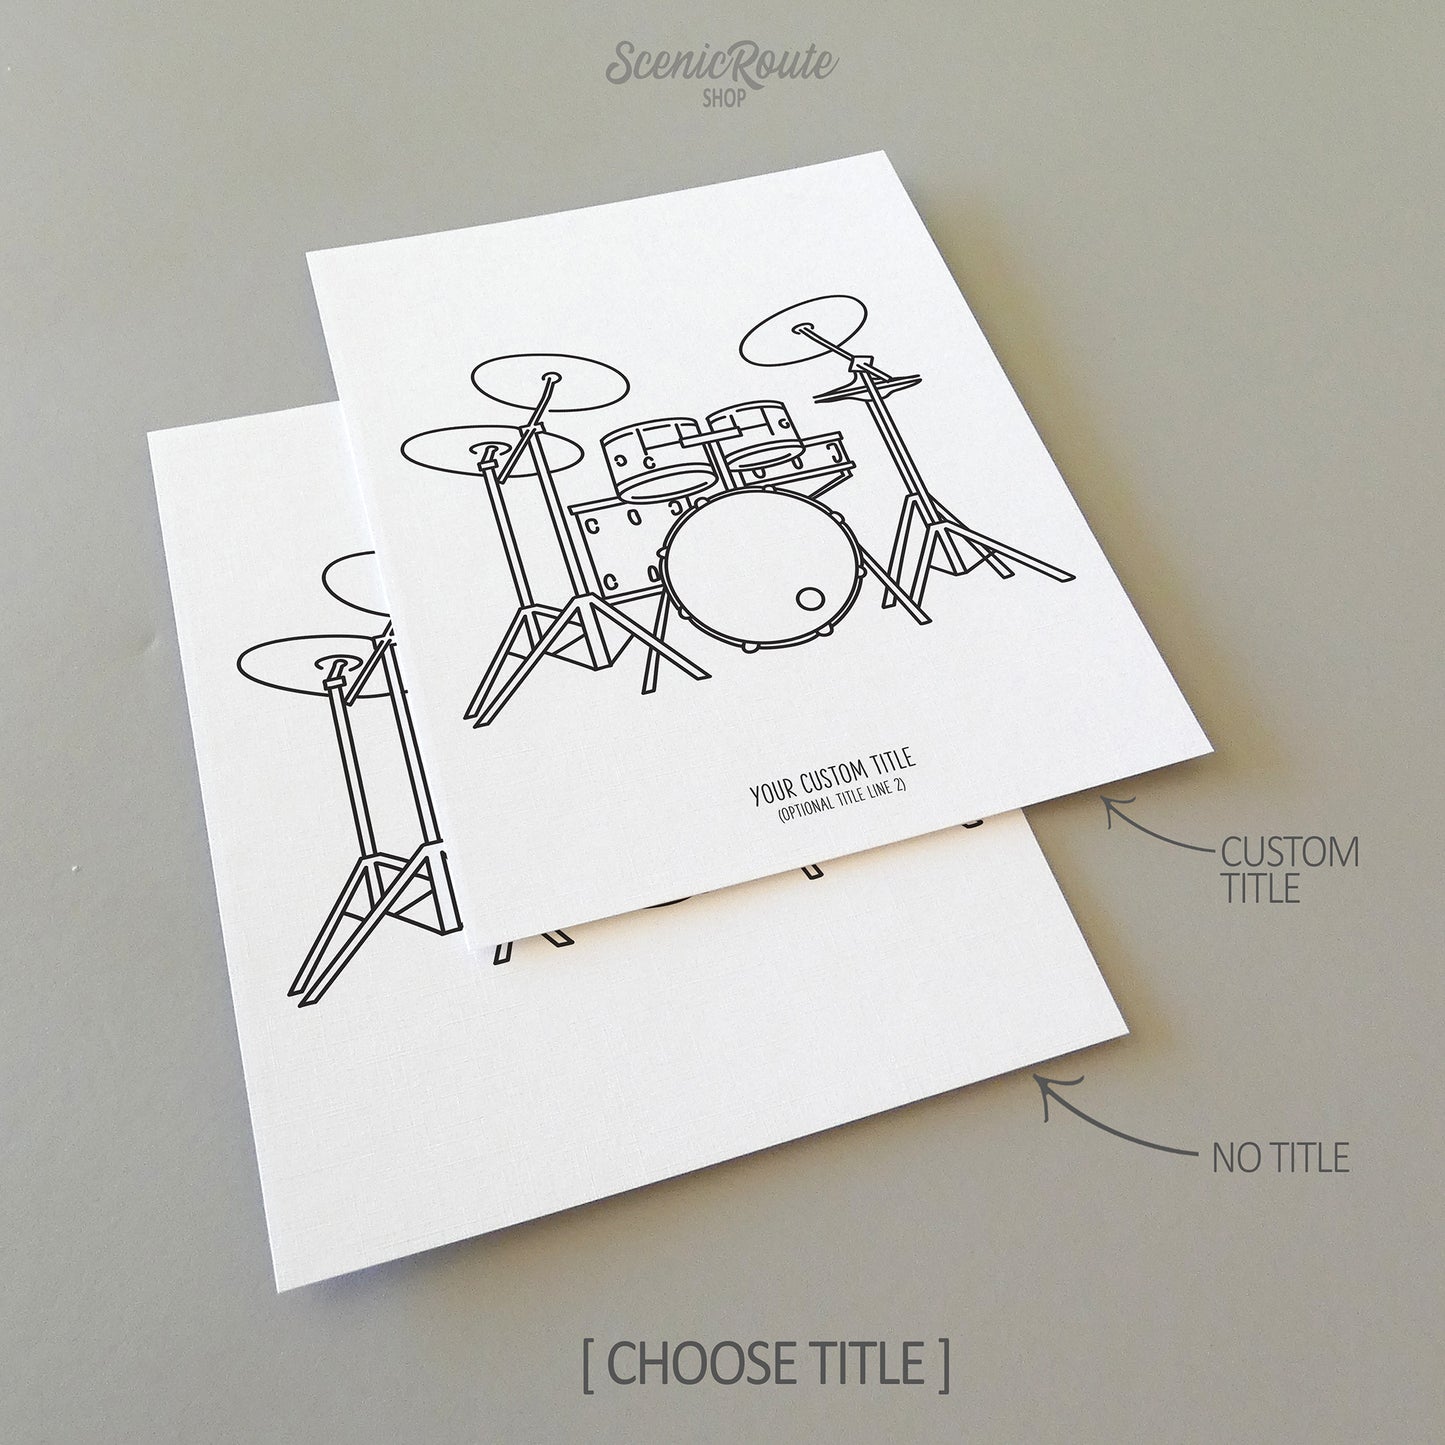 Two line art drawings of a drum set instrument on white linen paper with a gray background.  The pieces are shown with “No Title” and “Custom Title” options for the available art print options.